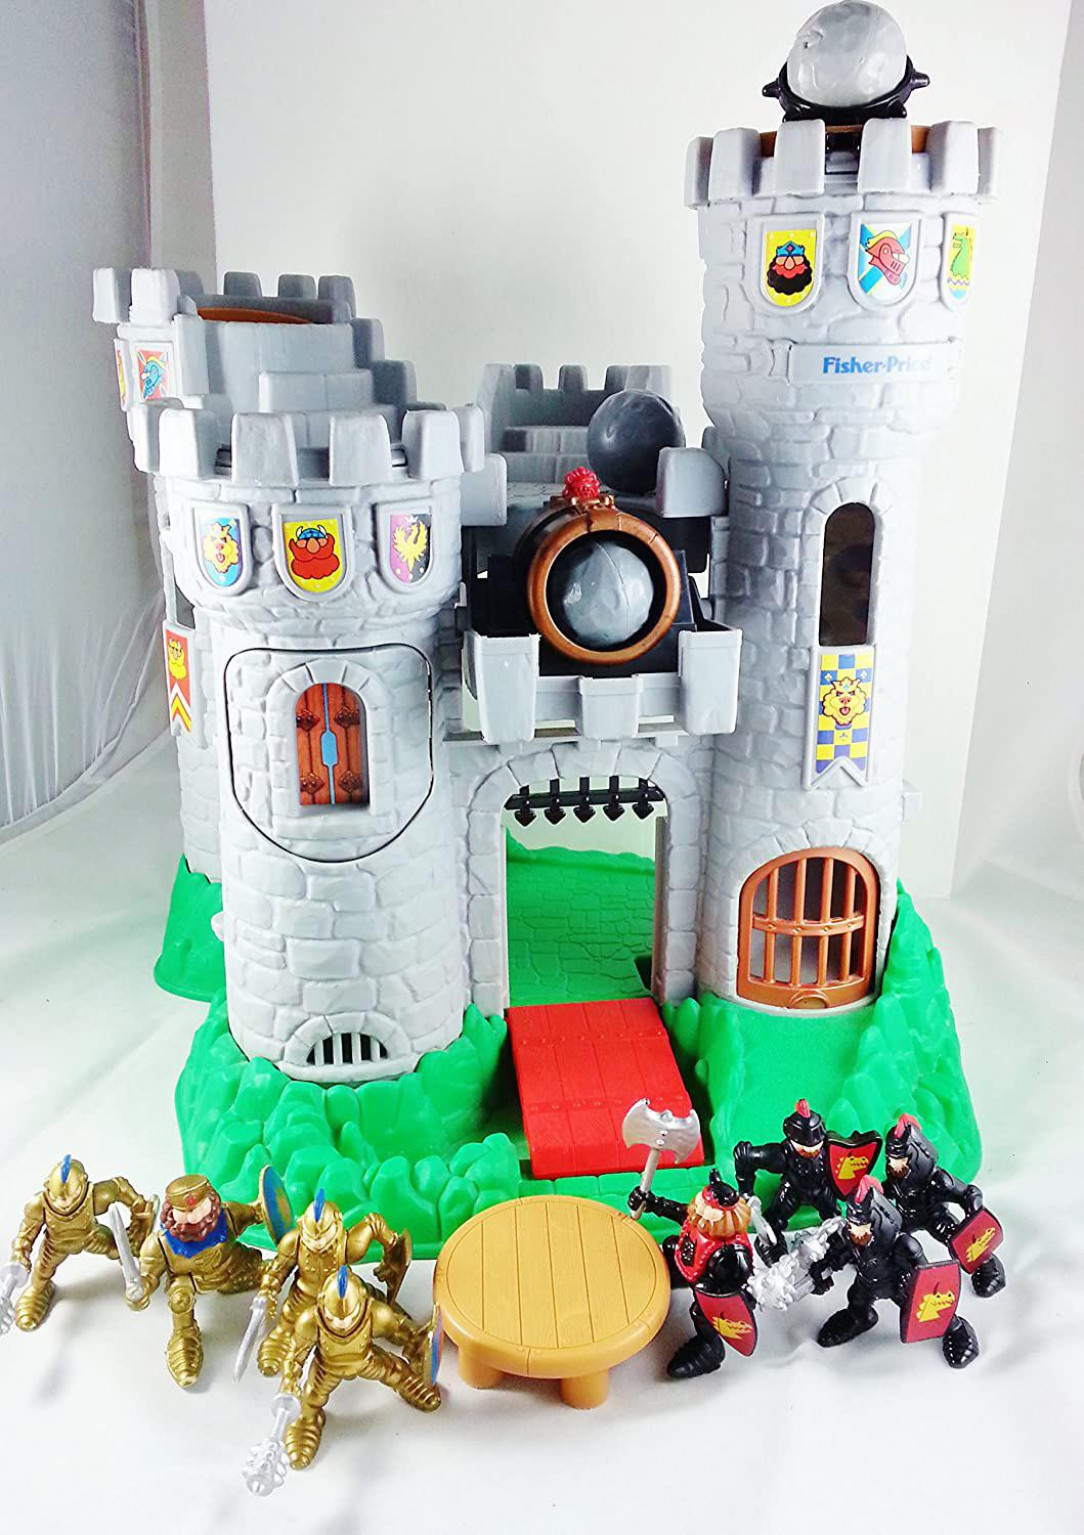 Fisher Price Castle From 90’s